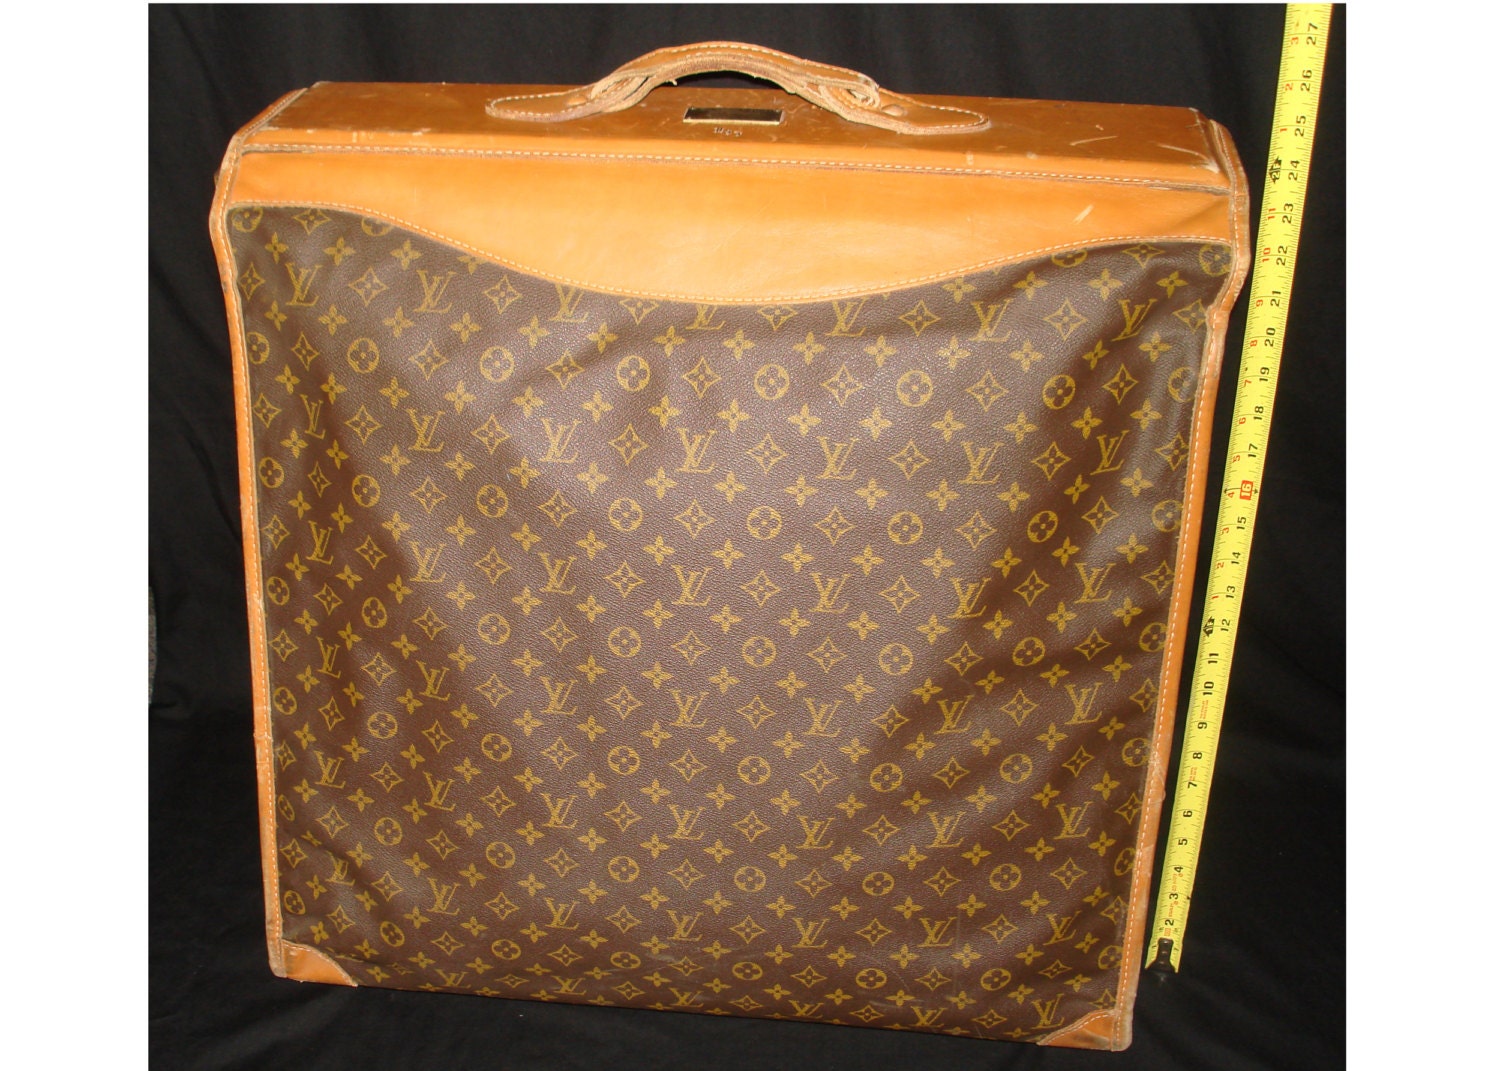 FREE SHIPPING-Authentic-Vintage-Louis VUITTON-Extra Large-Garment-Luggage-Suitcase-Bag